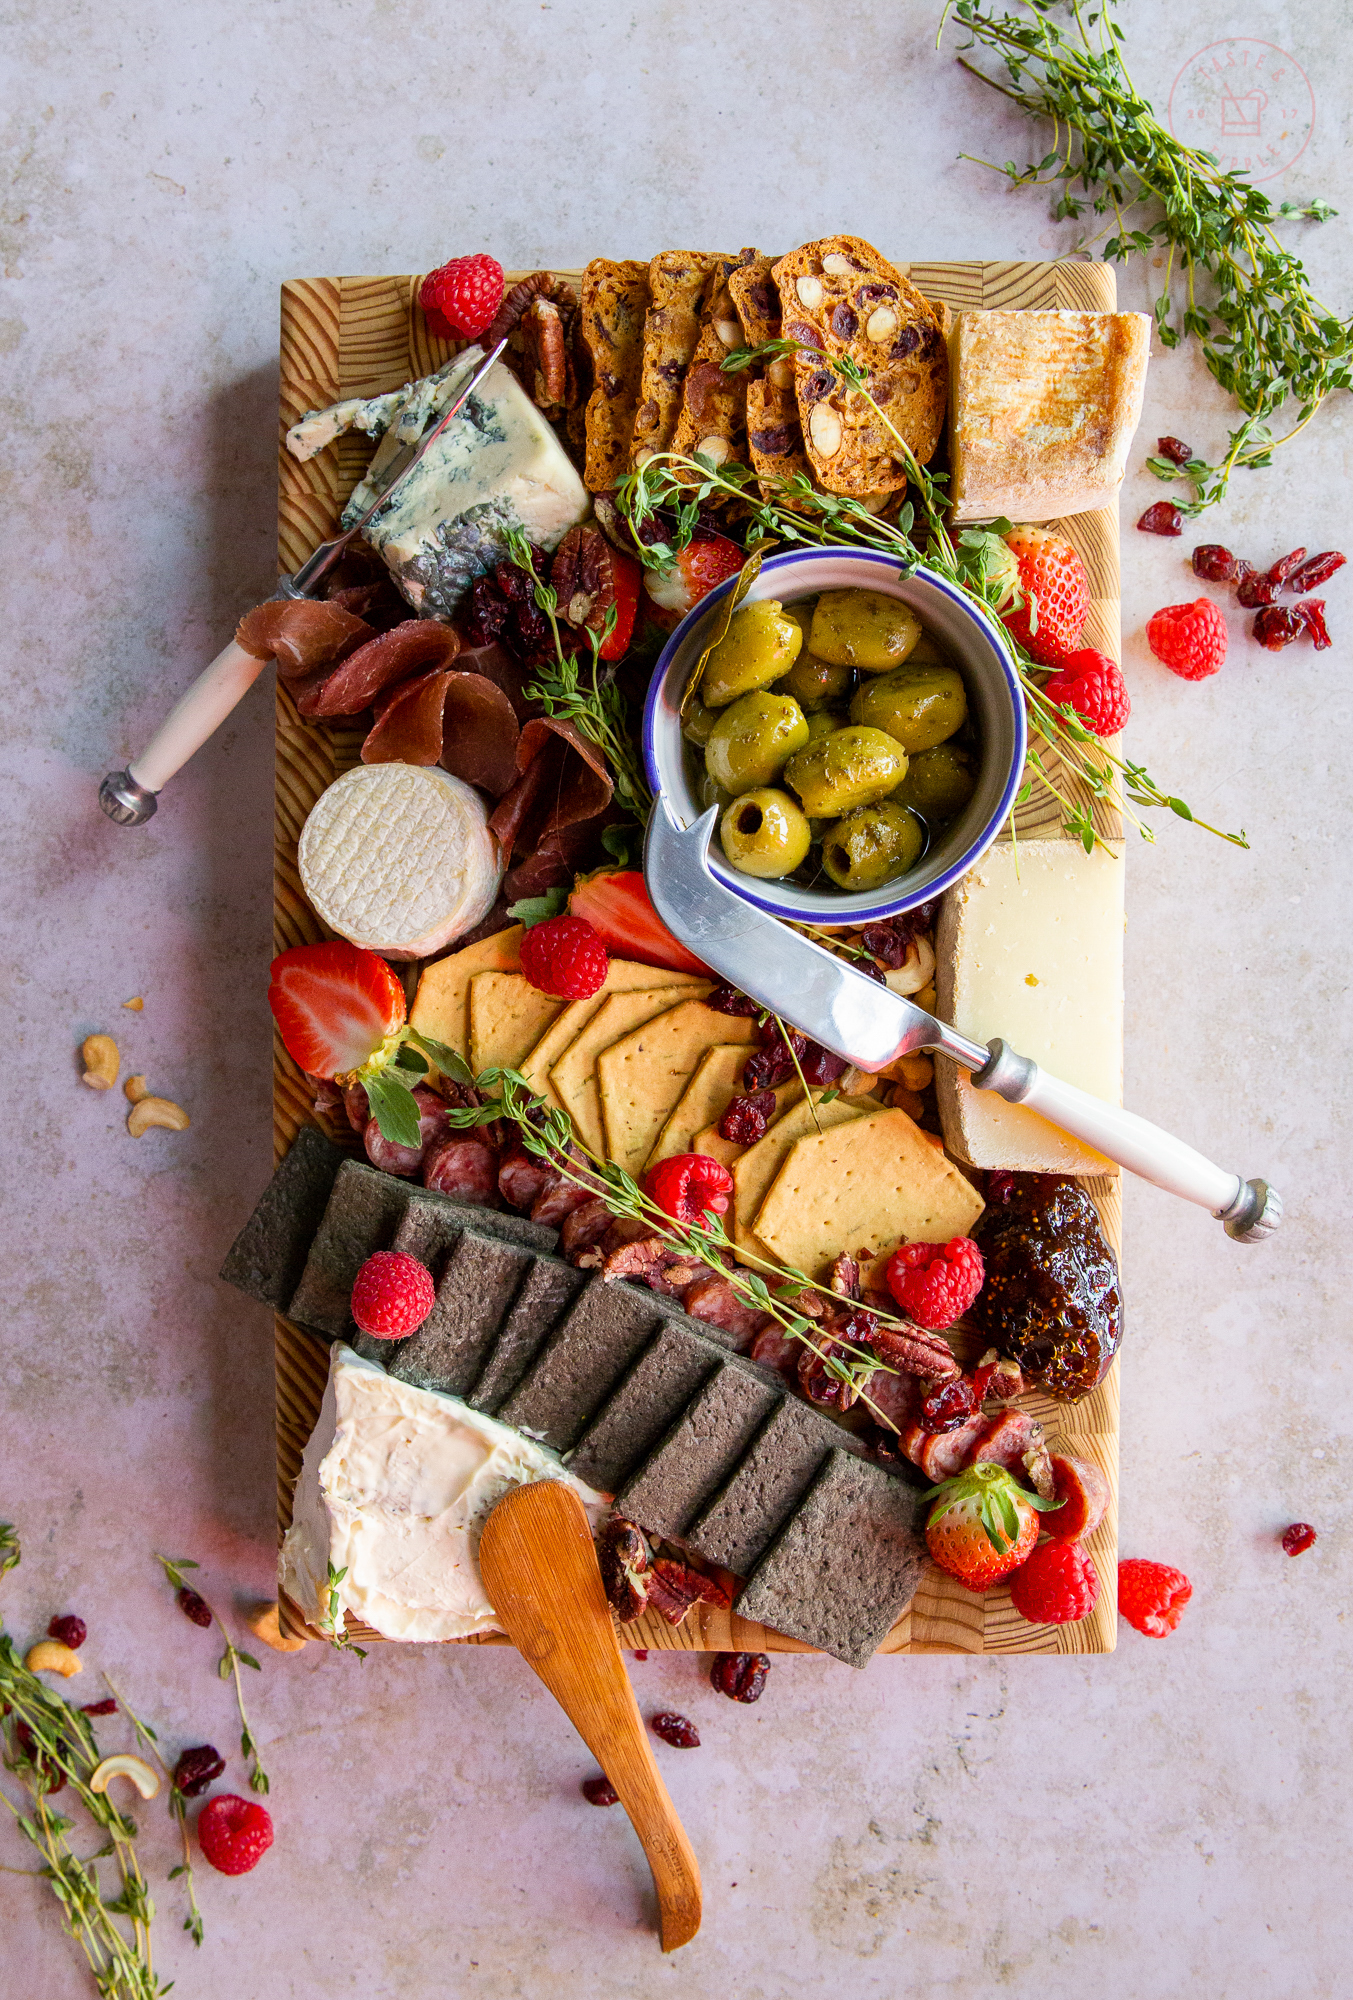 How to Build a Charcuterie Board | Taste and Tipple